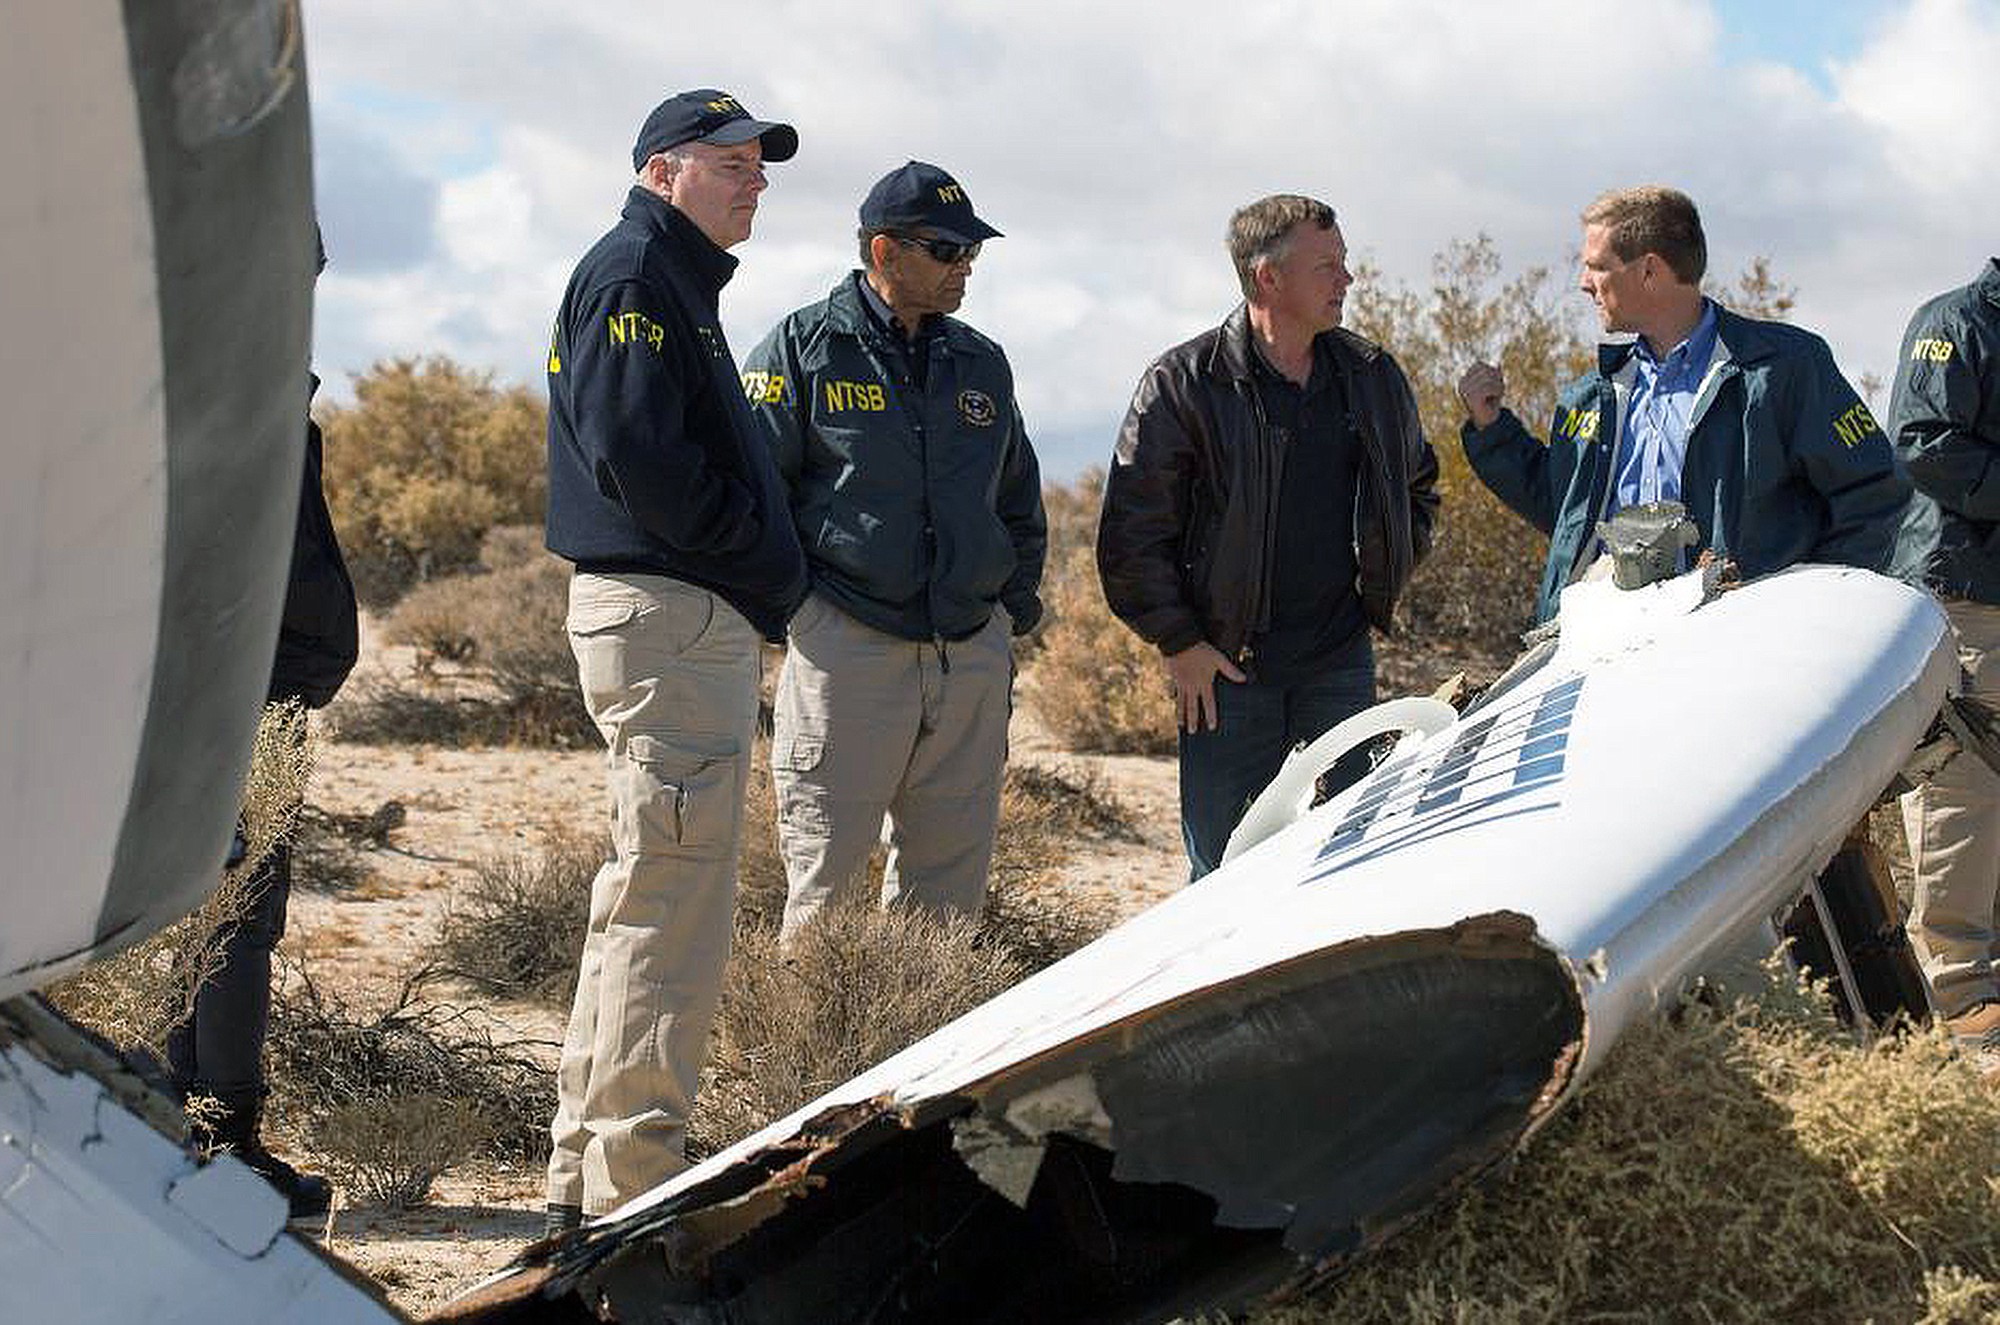 Virgin Galactic pilot Todd Ericson, right, talks with NTSB Acting Chairman Christopher A. Hart, second from left, at the SpaceShipTwo accident site with investigators in Mojave, Calif.